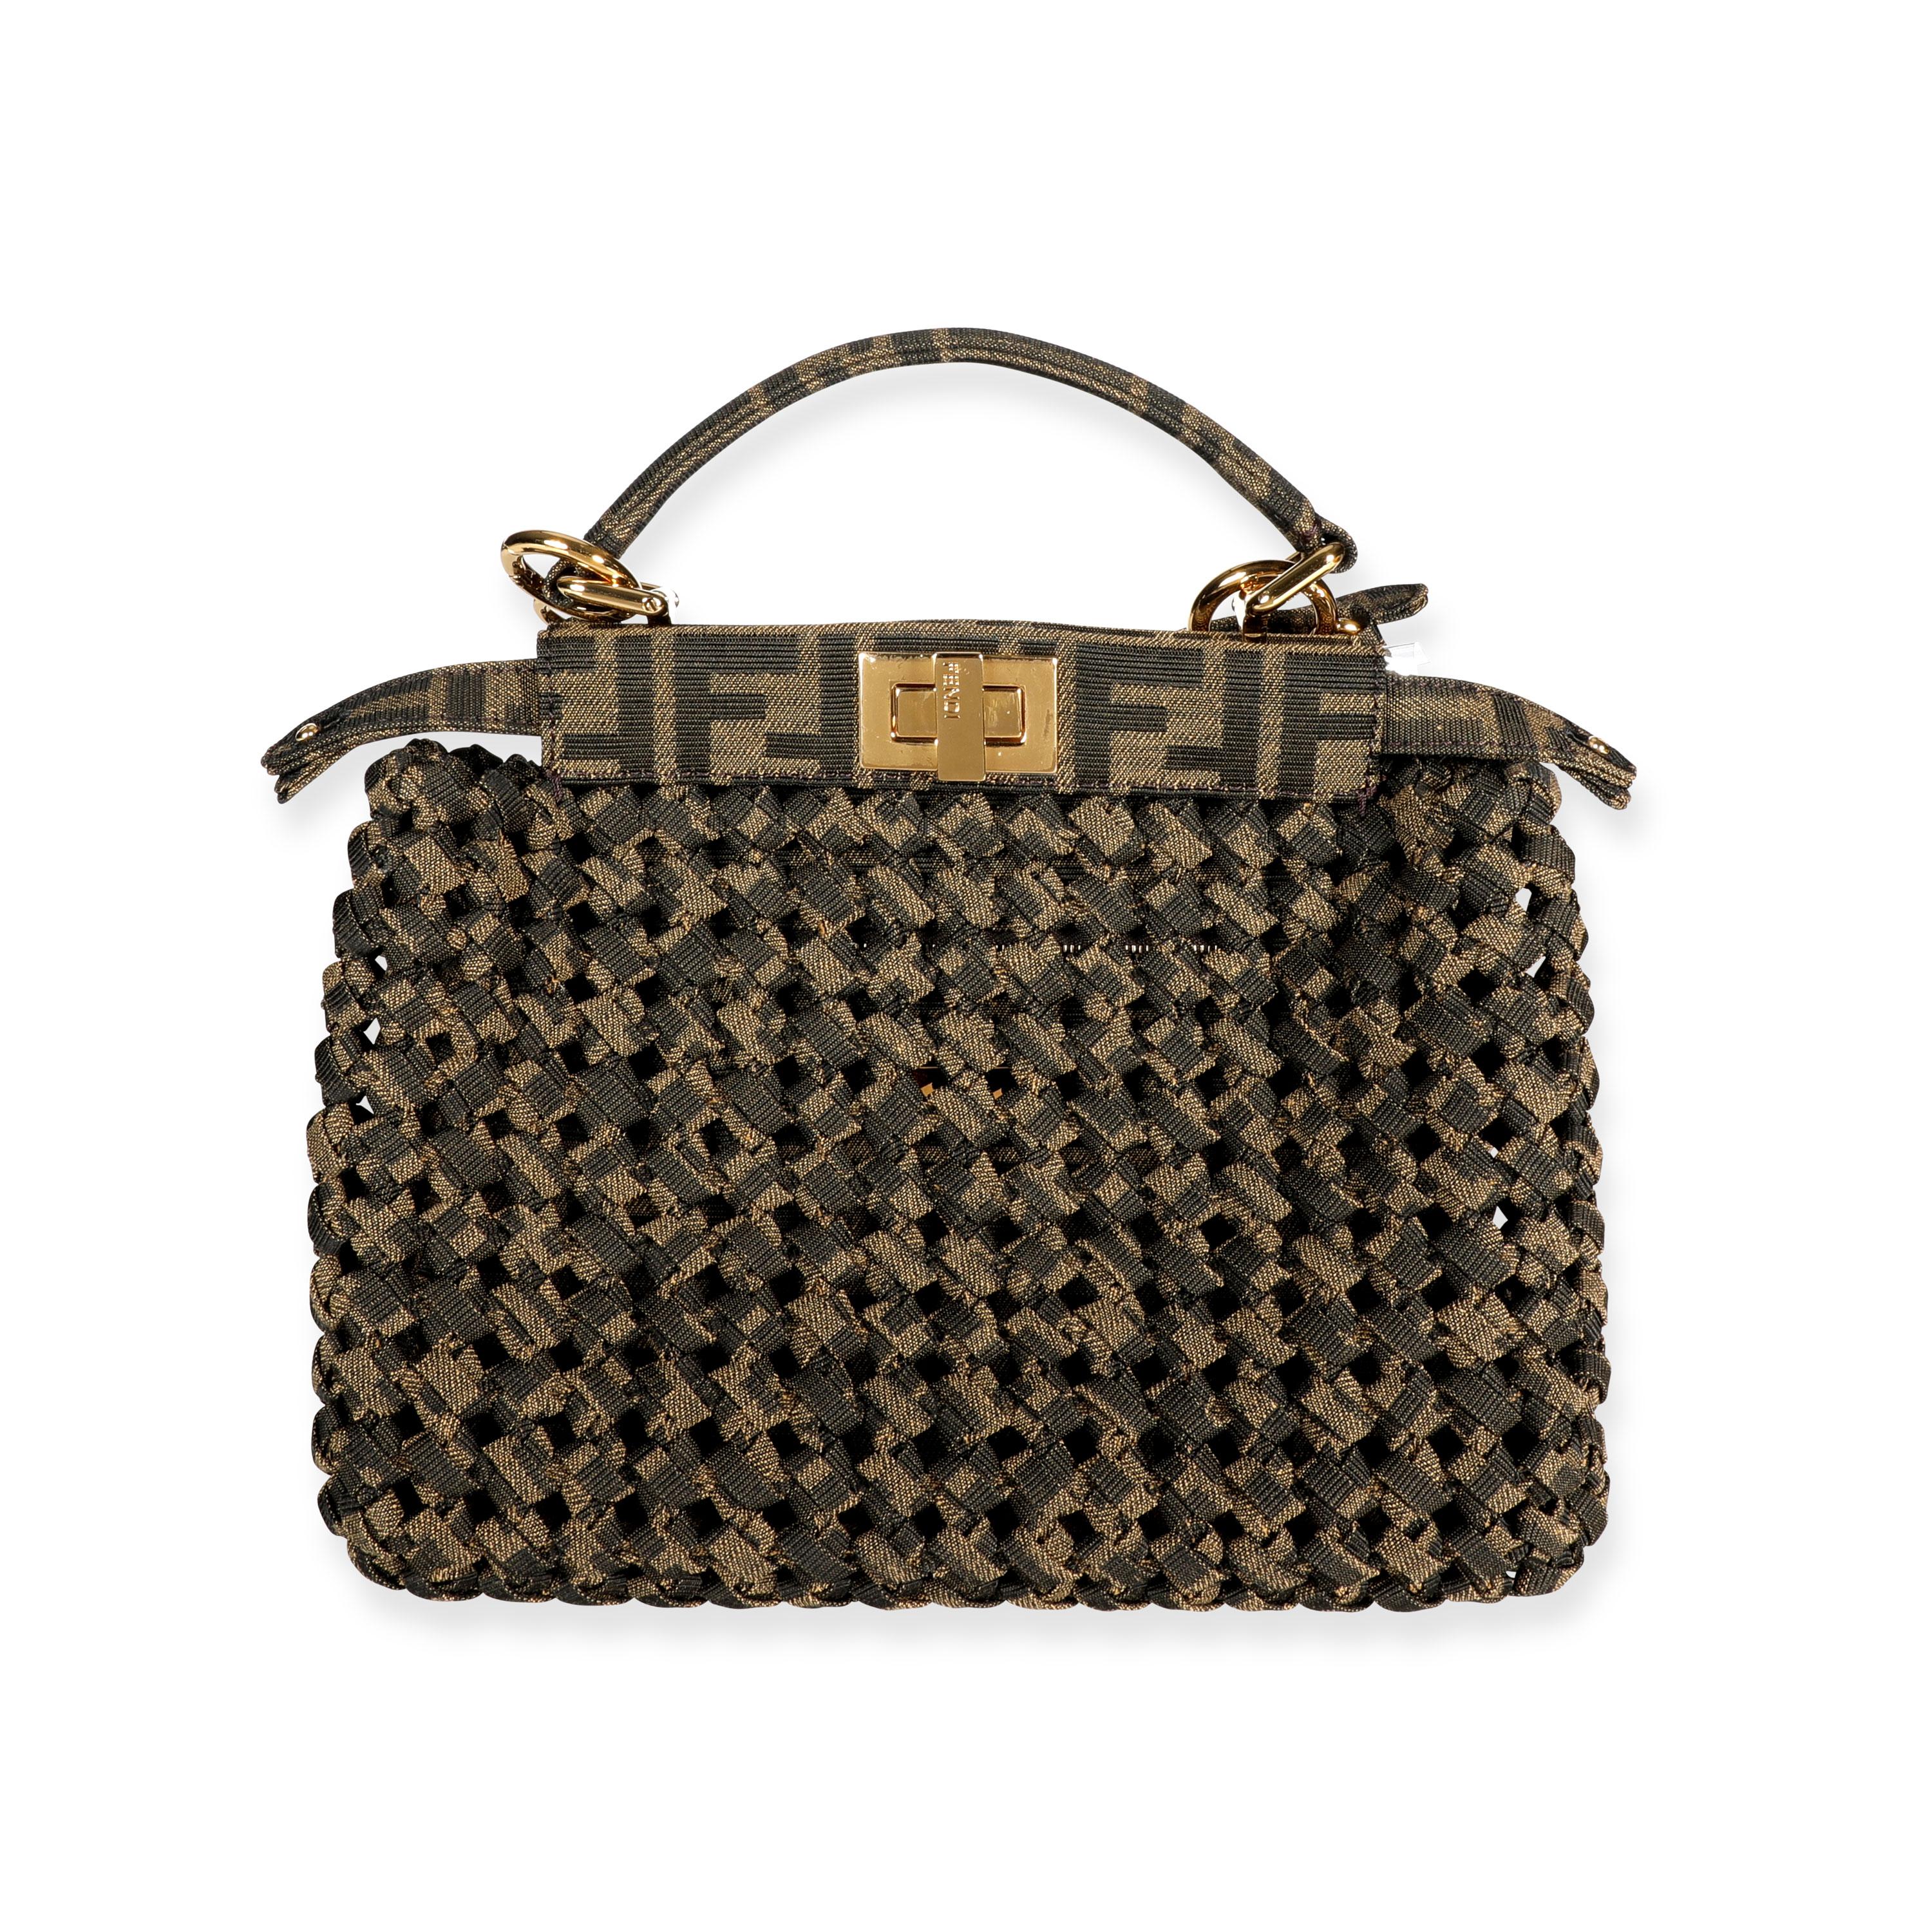 Listing Title: Fendi Brown Jacquard Interlace Iconic Peekaboo Mini Bag
SKU: 107048
MSRP: USD 4,200.00

Condition Description: From the current season, the iconic Peekaboo is crafted in Zucca print jacquard fabric with shiny gold hardware.
Handbag